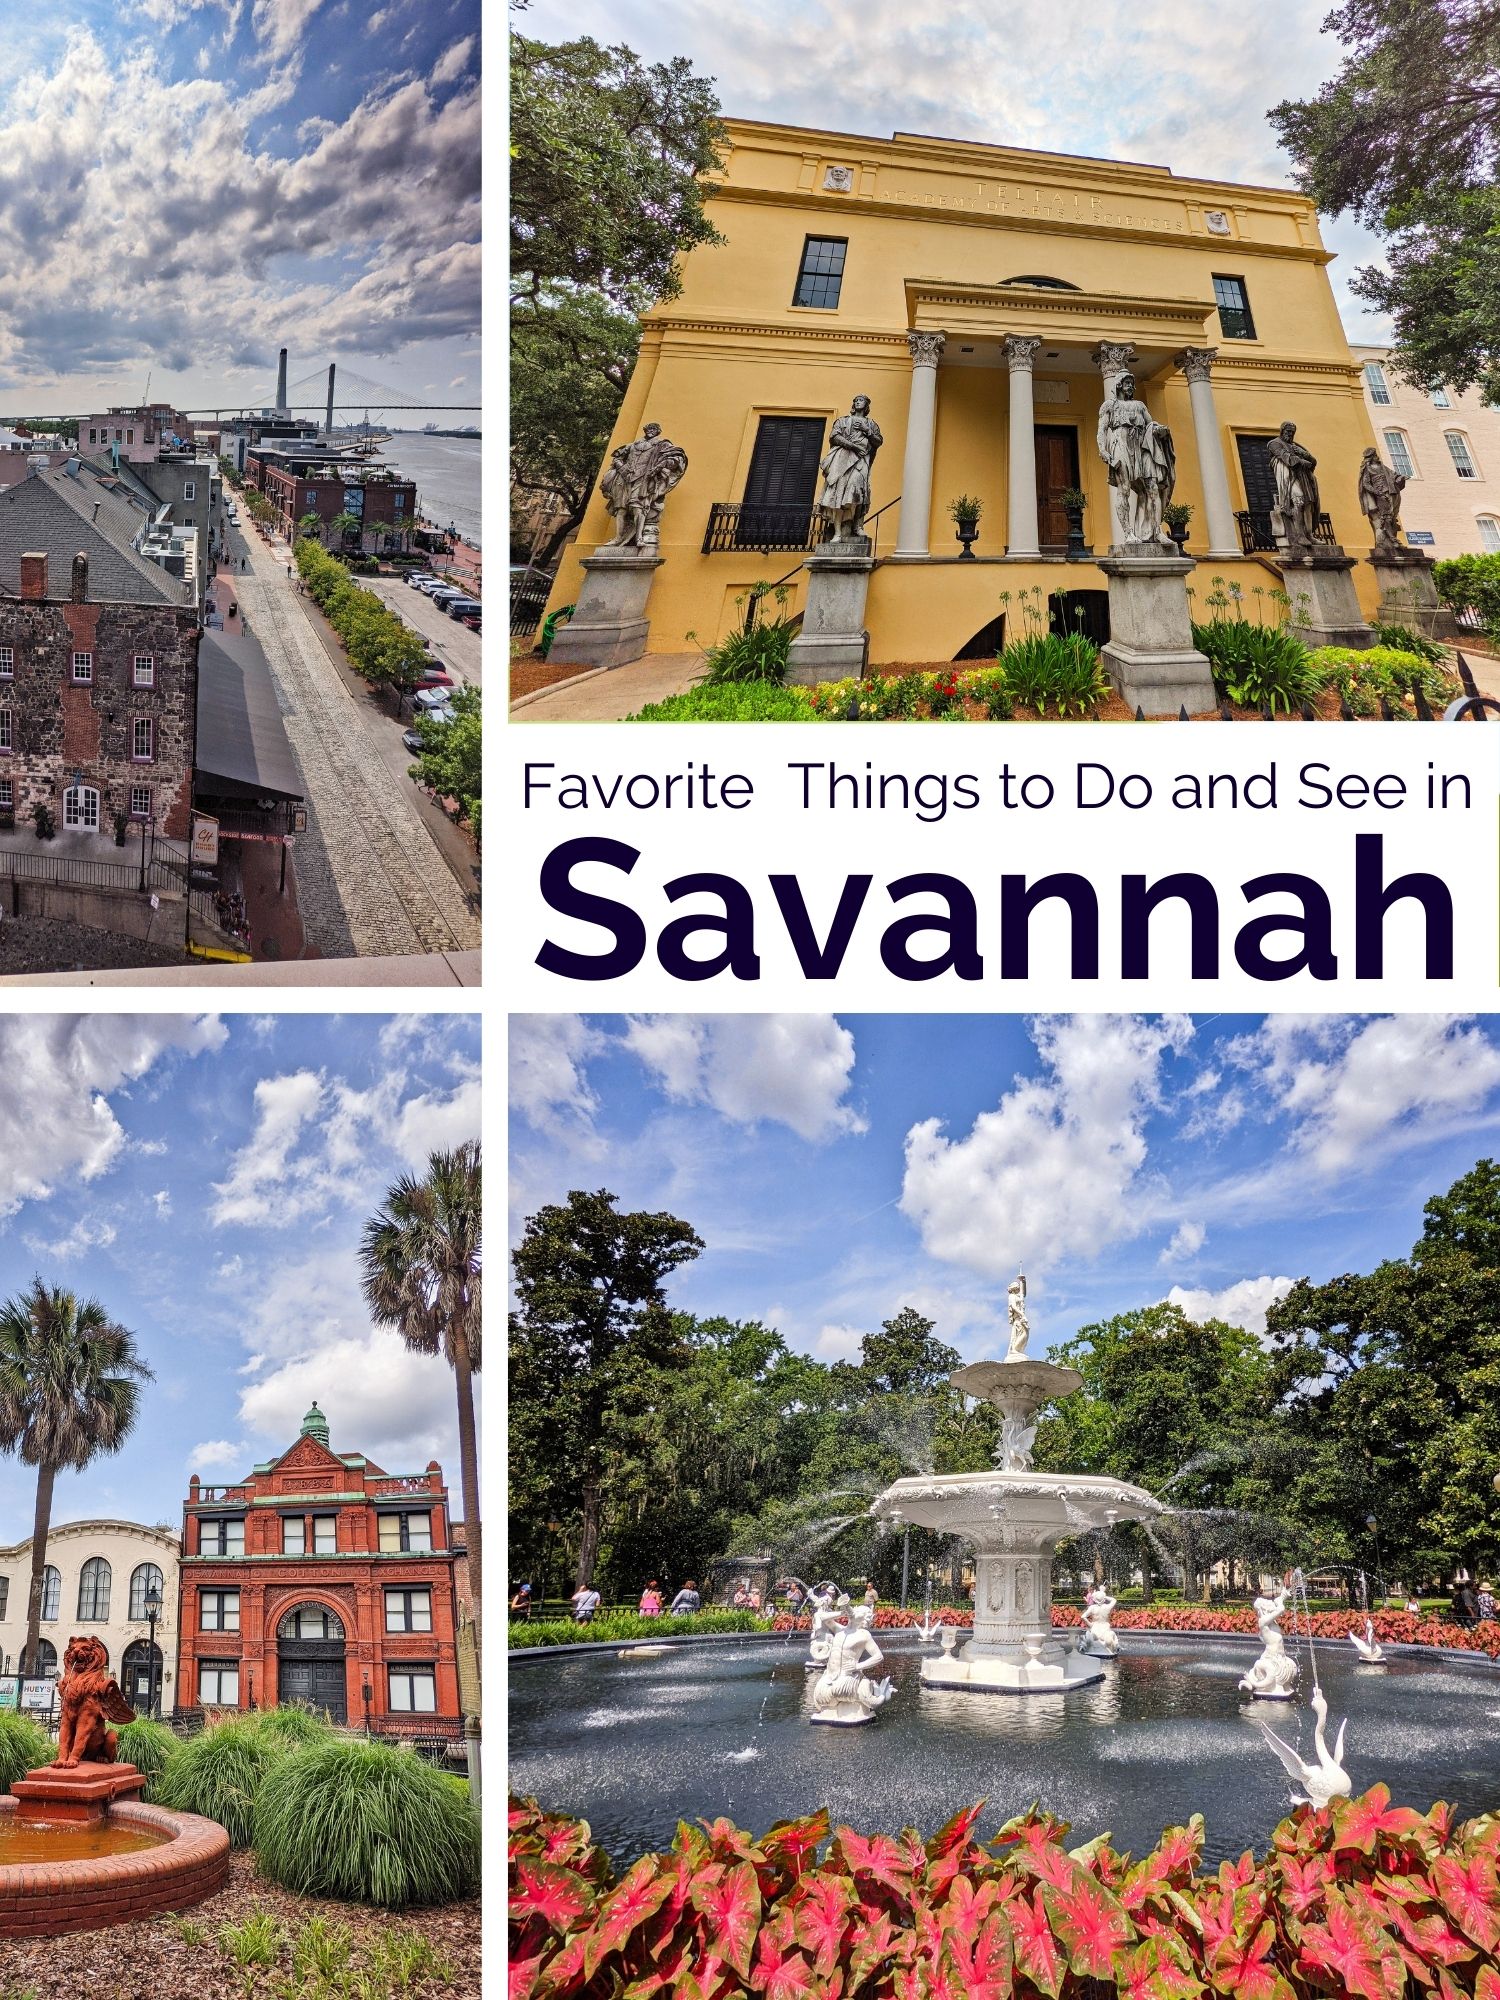 There are tons of things to do in Savannah since it's beautiful in every season. These sights, activities and tours in Savannah are ideal for a short trip or a whole week enjoying Savannah and Tybee Island.